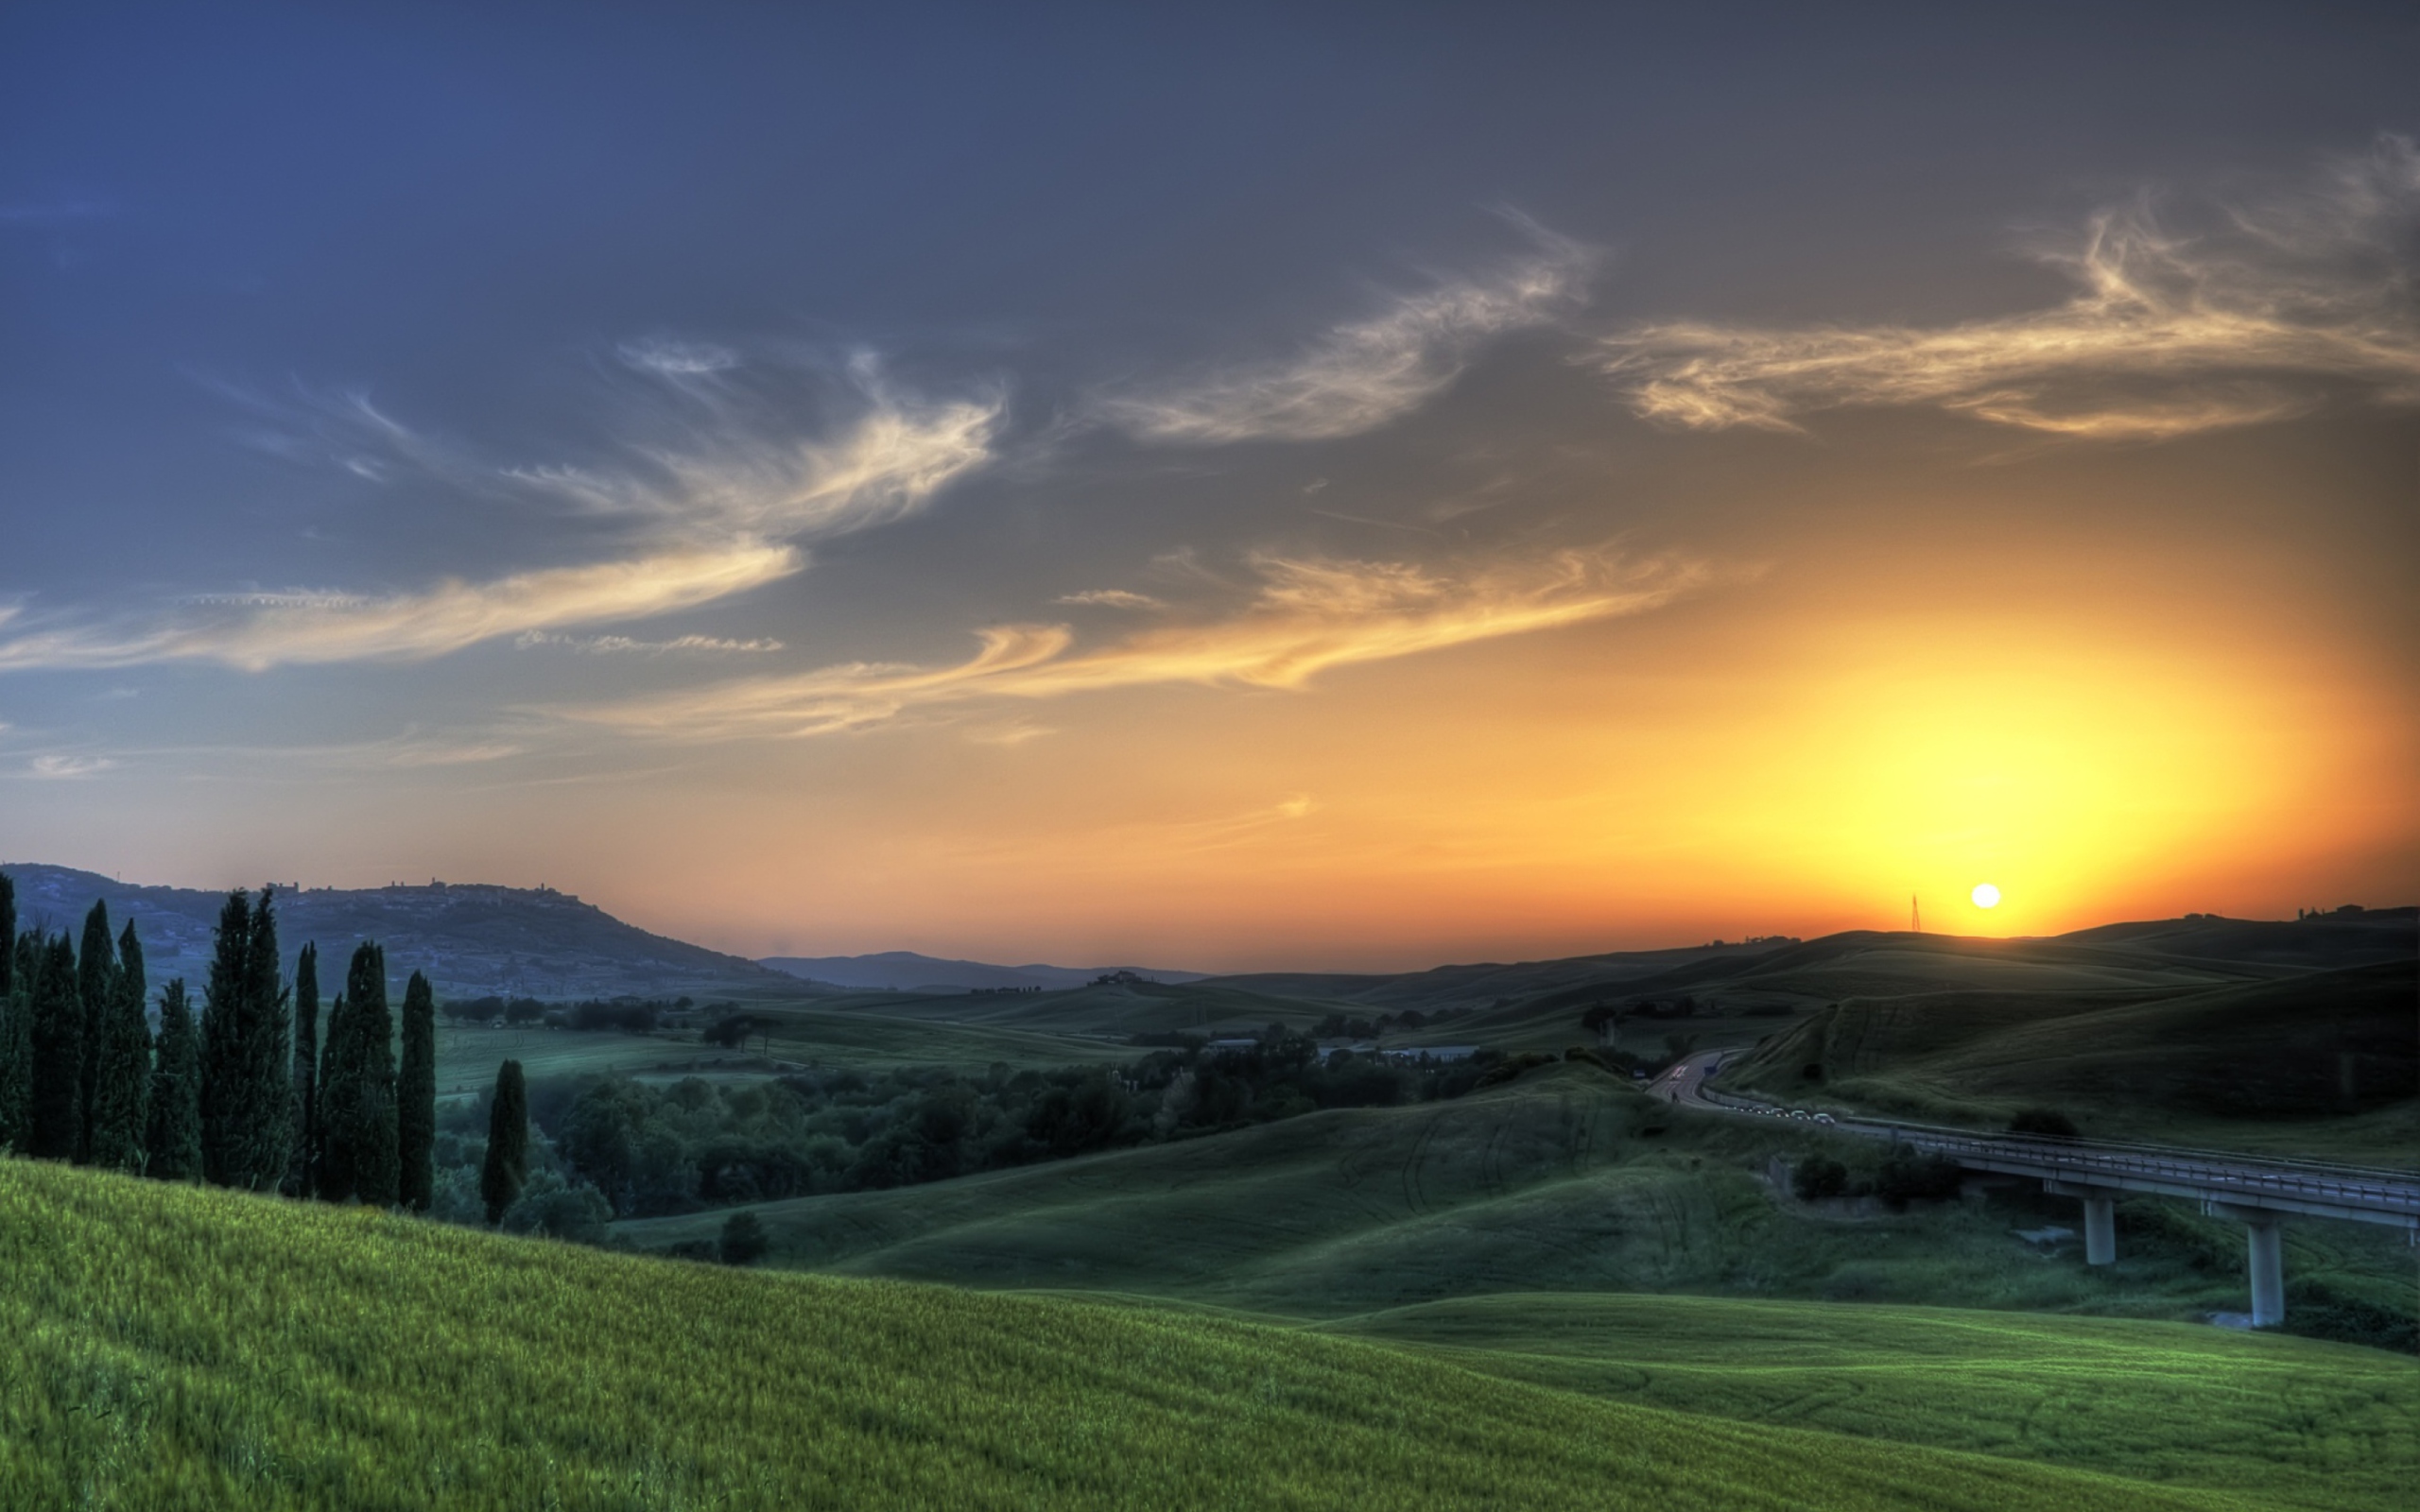 Sunset In Tuscany wallpaper 2560x1600